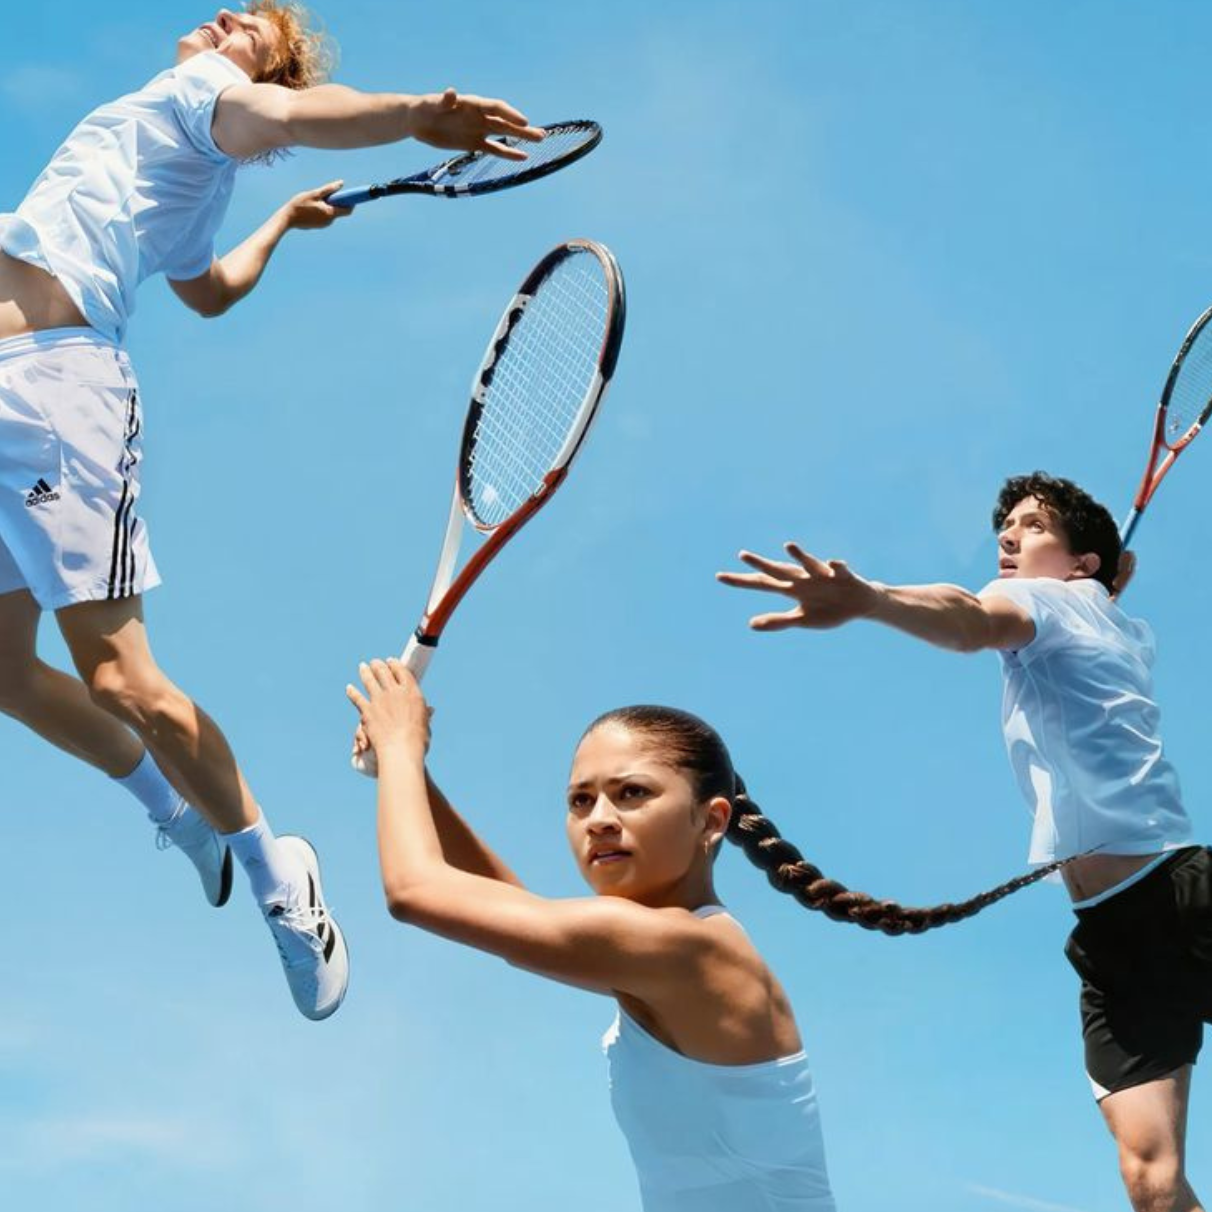 The “Challengers” Effect: Tennis Fashion Takes Over